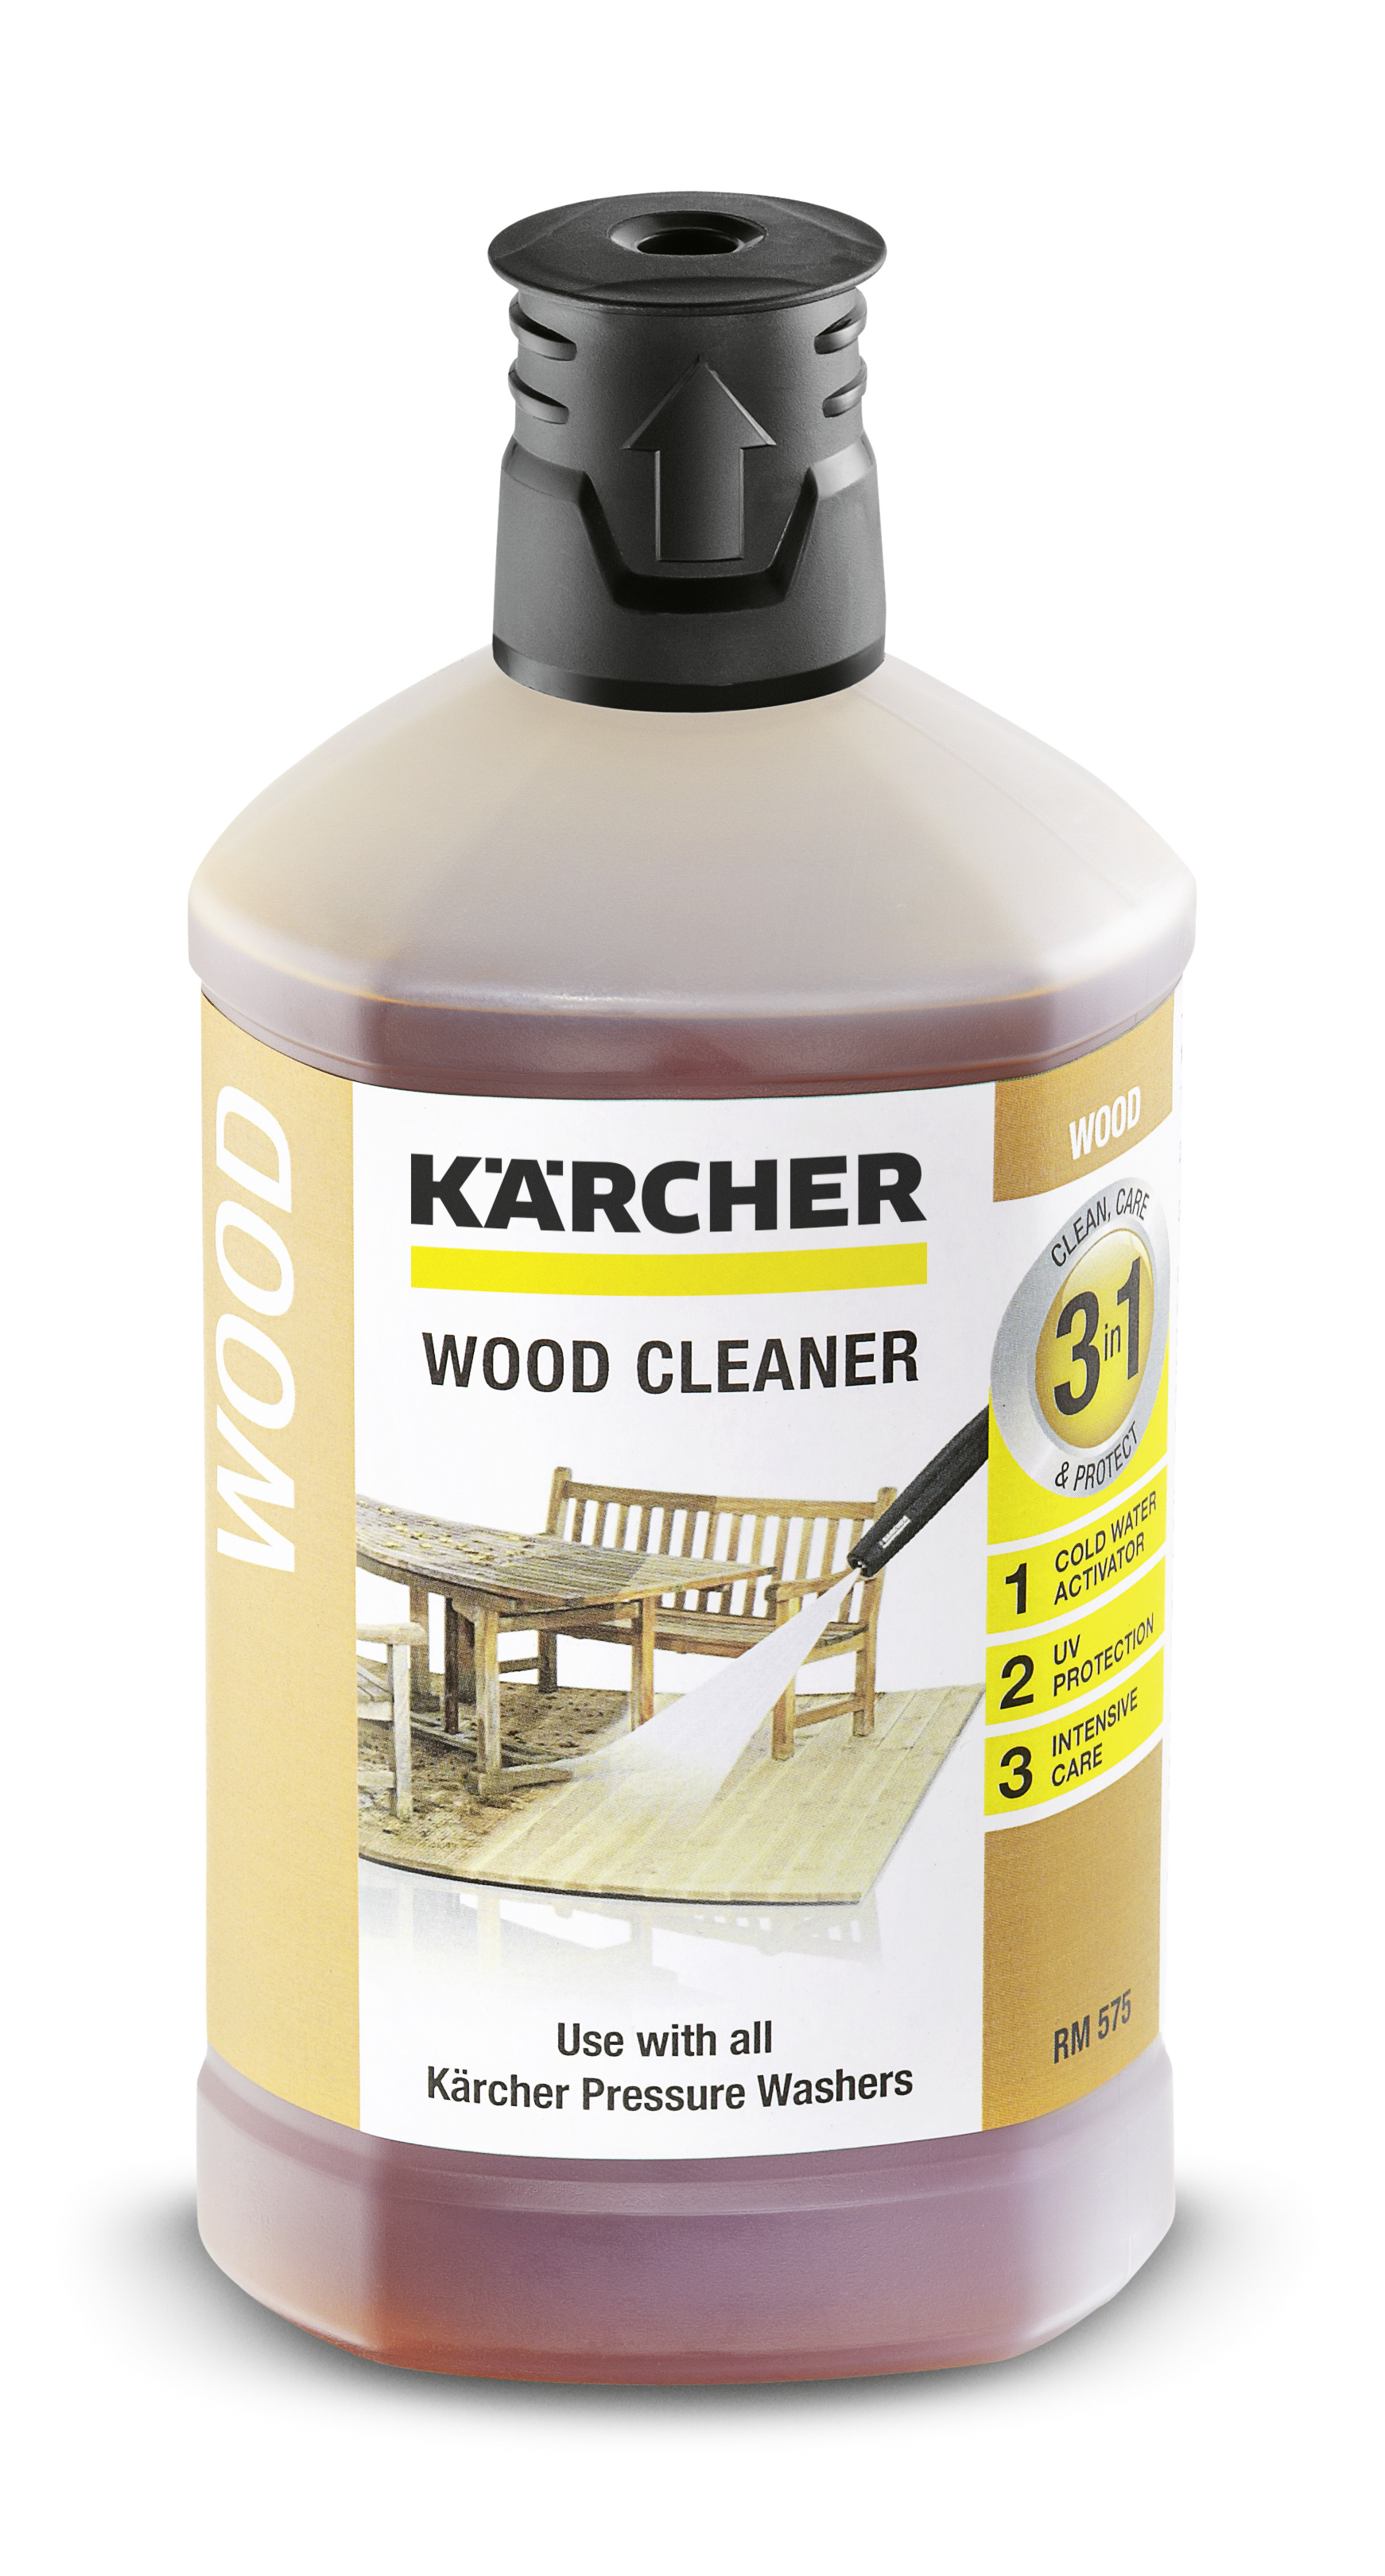 Wood cleaner 3-in-1 RM 612, 1l Karcher